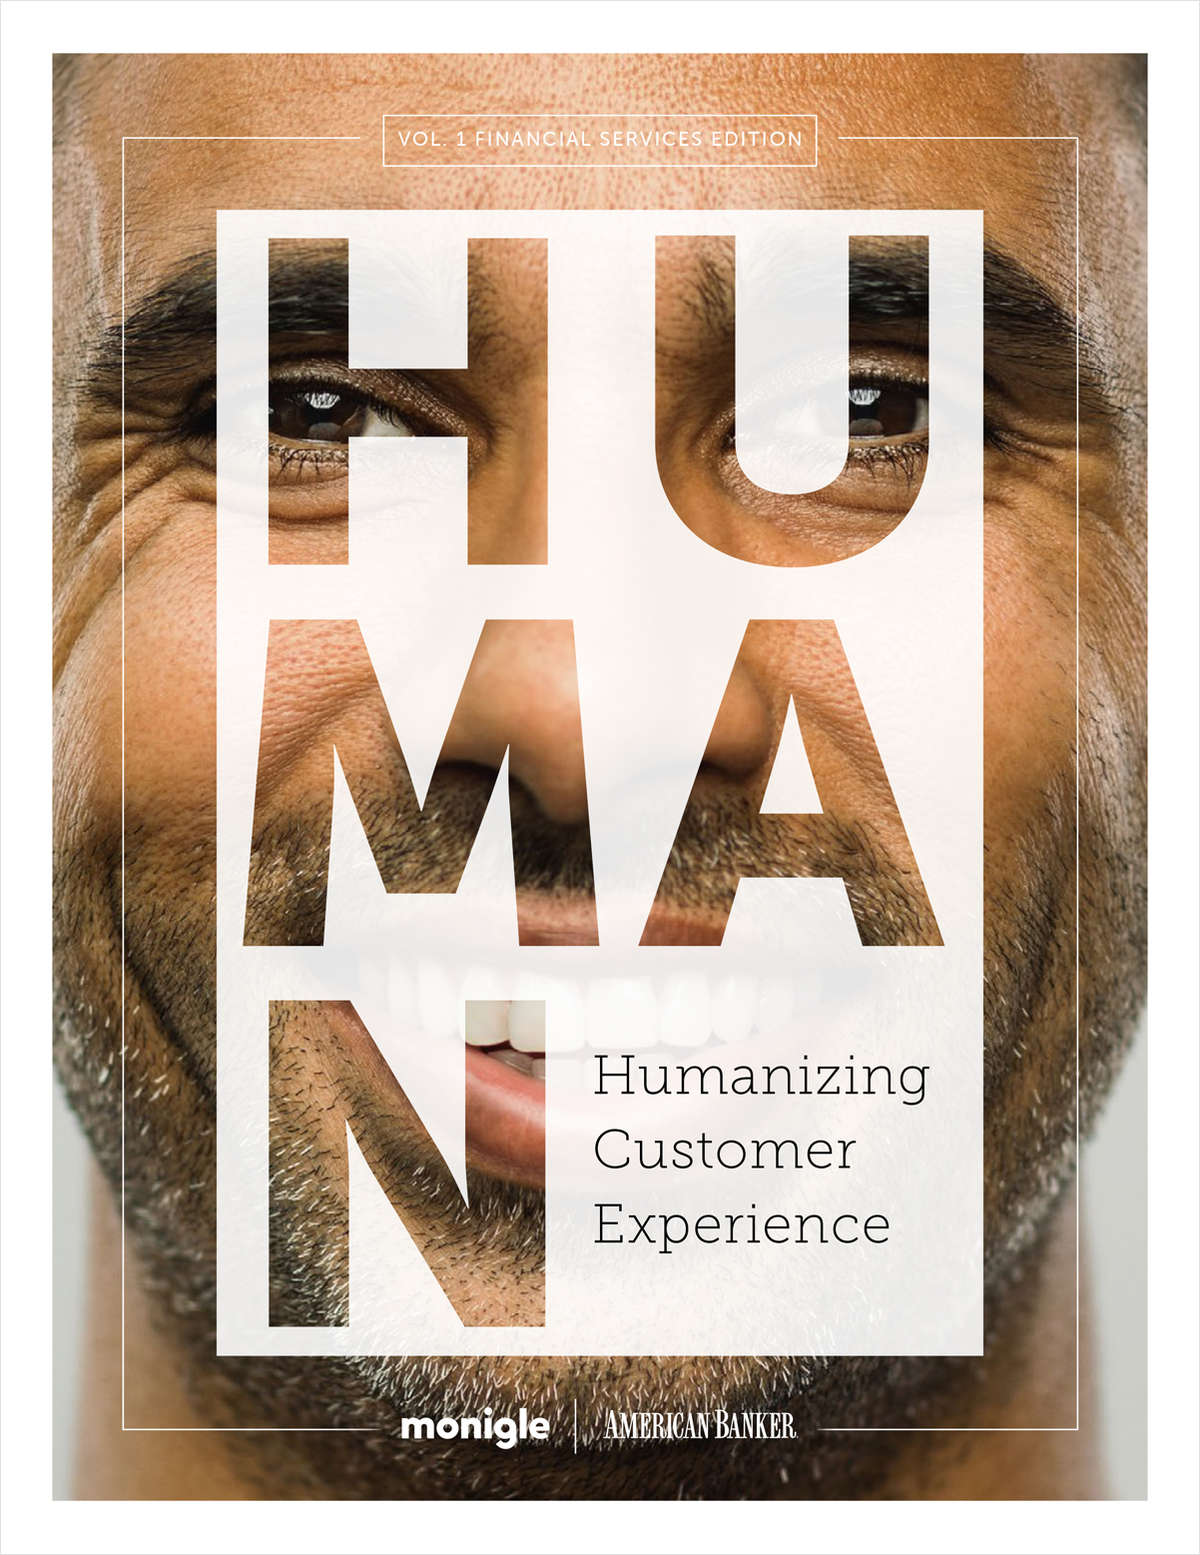 Humanizing Customer Experience: Financial Services Edition - Vol 1